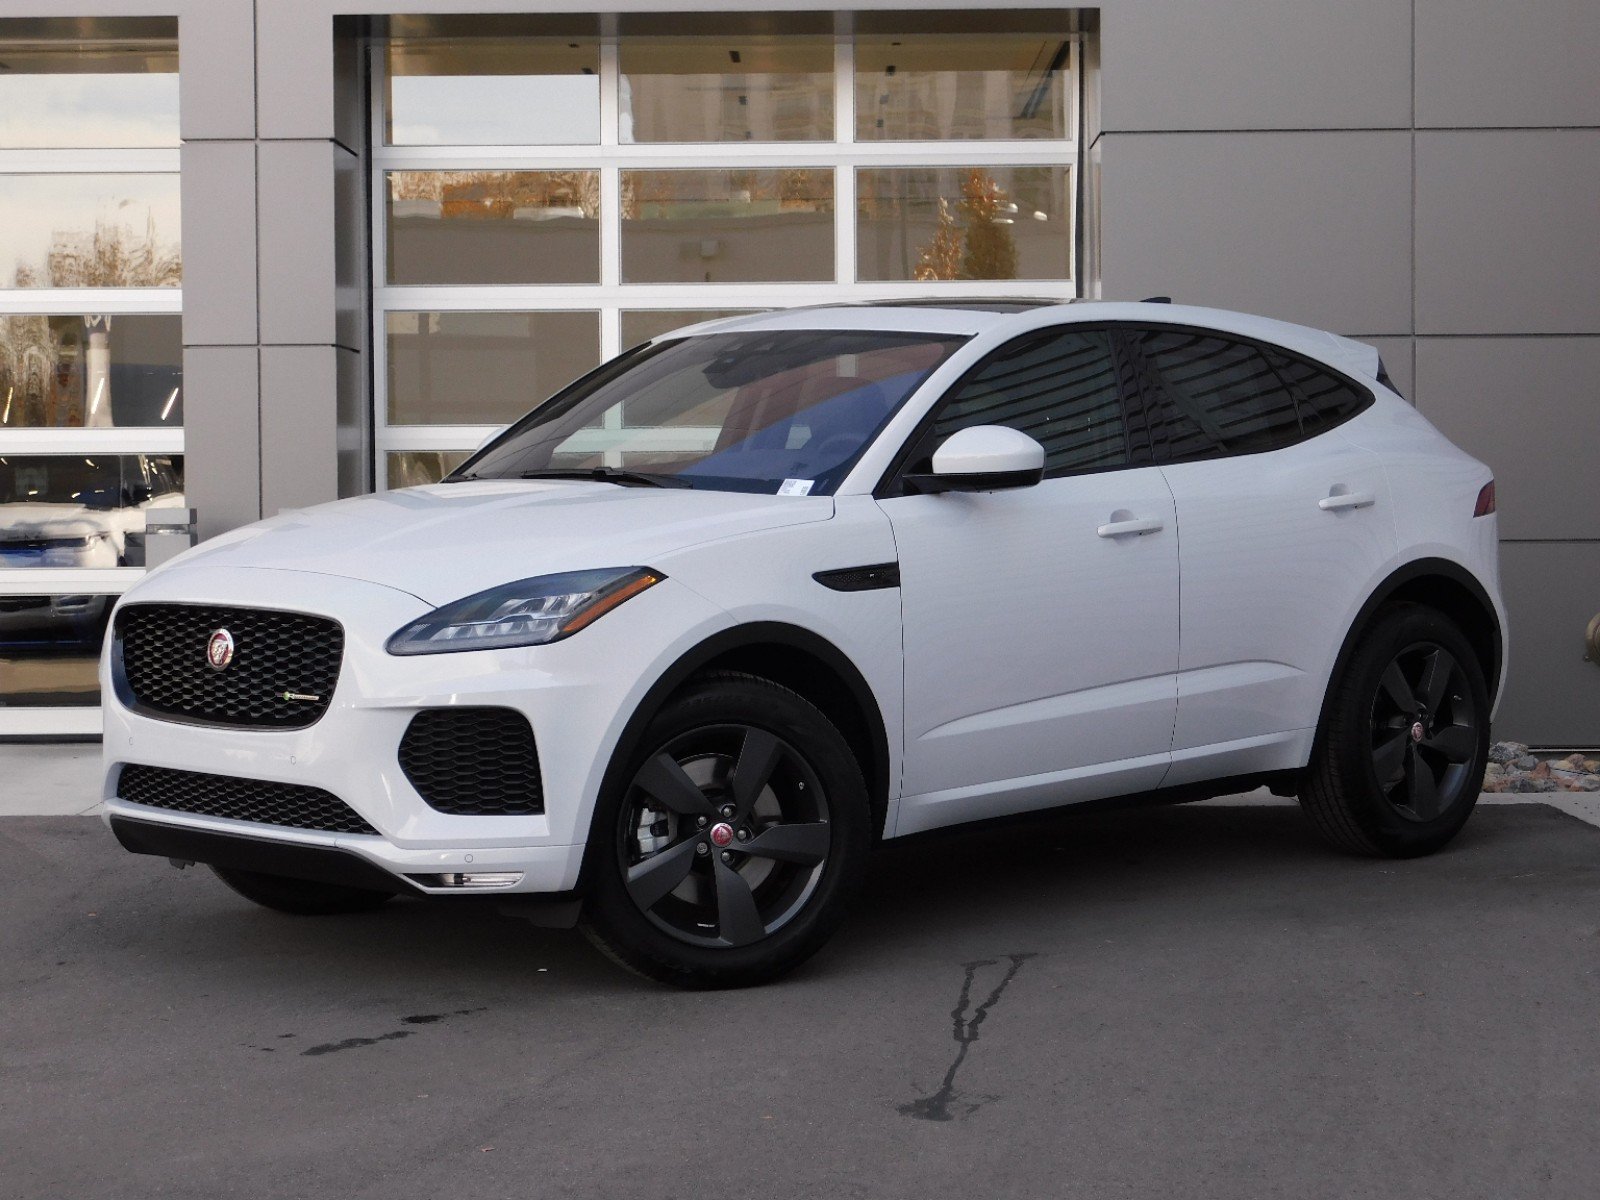 New 2020 Jaguar E-PACE Checkered Flag Edition SUV in Salt ...